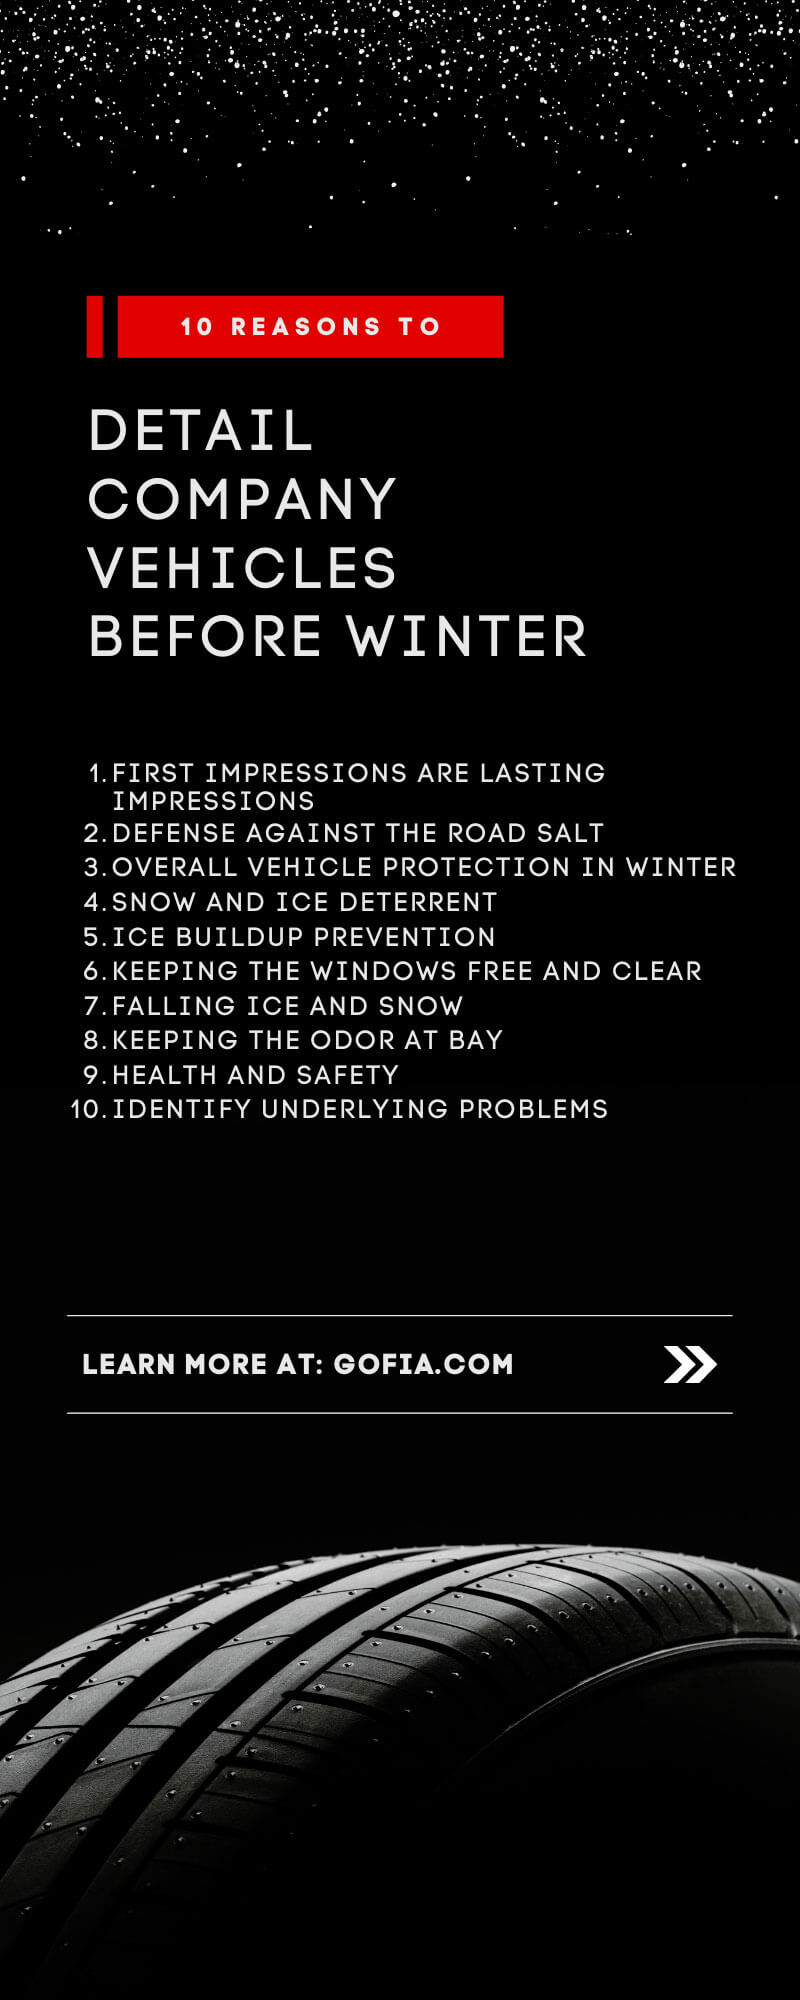 10 Reasons To Detail Company Vehicles Before Winter
